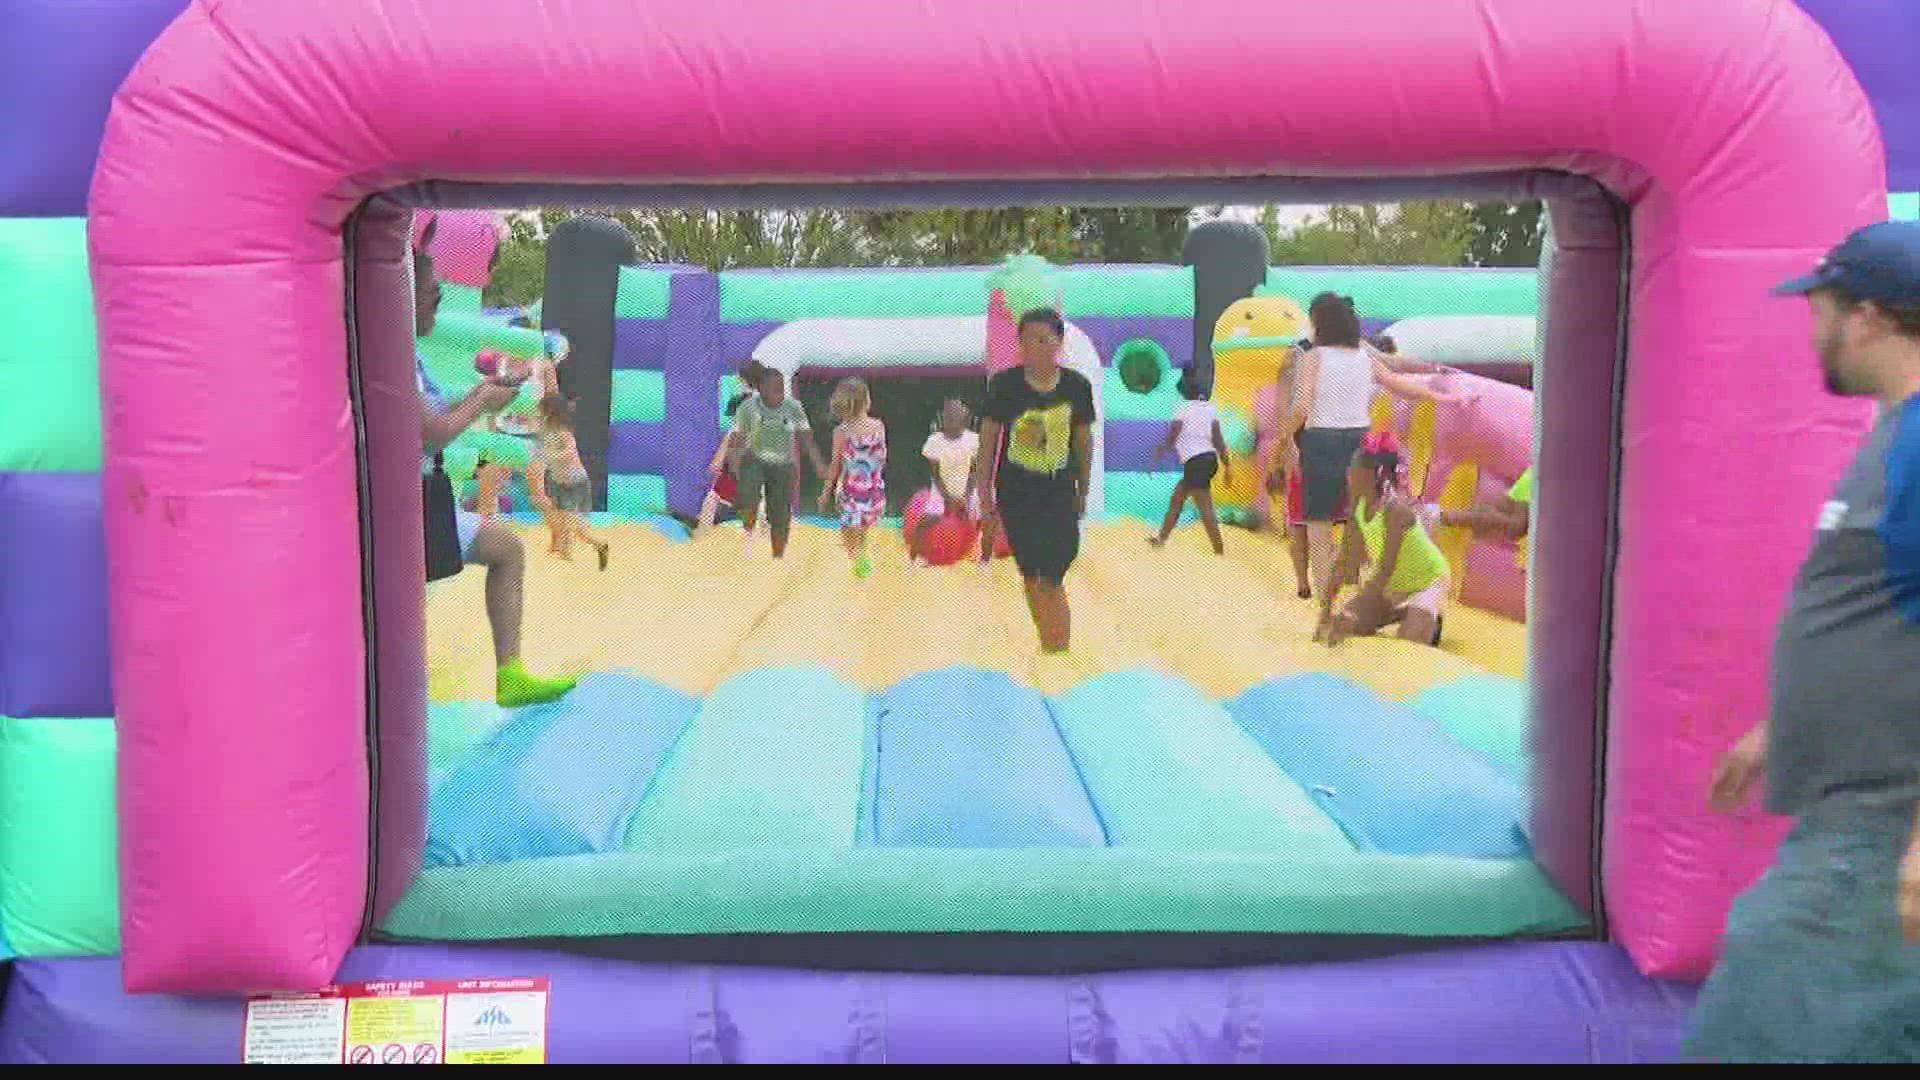 The Big Bounce America 2022 tour will inflate its four attractions at Waterman's Family Farm on the city's southeast side through Sunday, May 22.